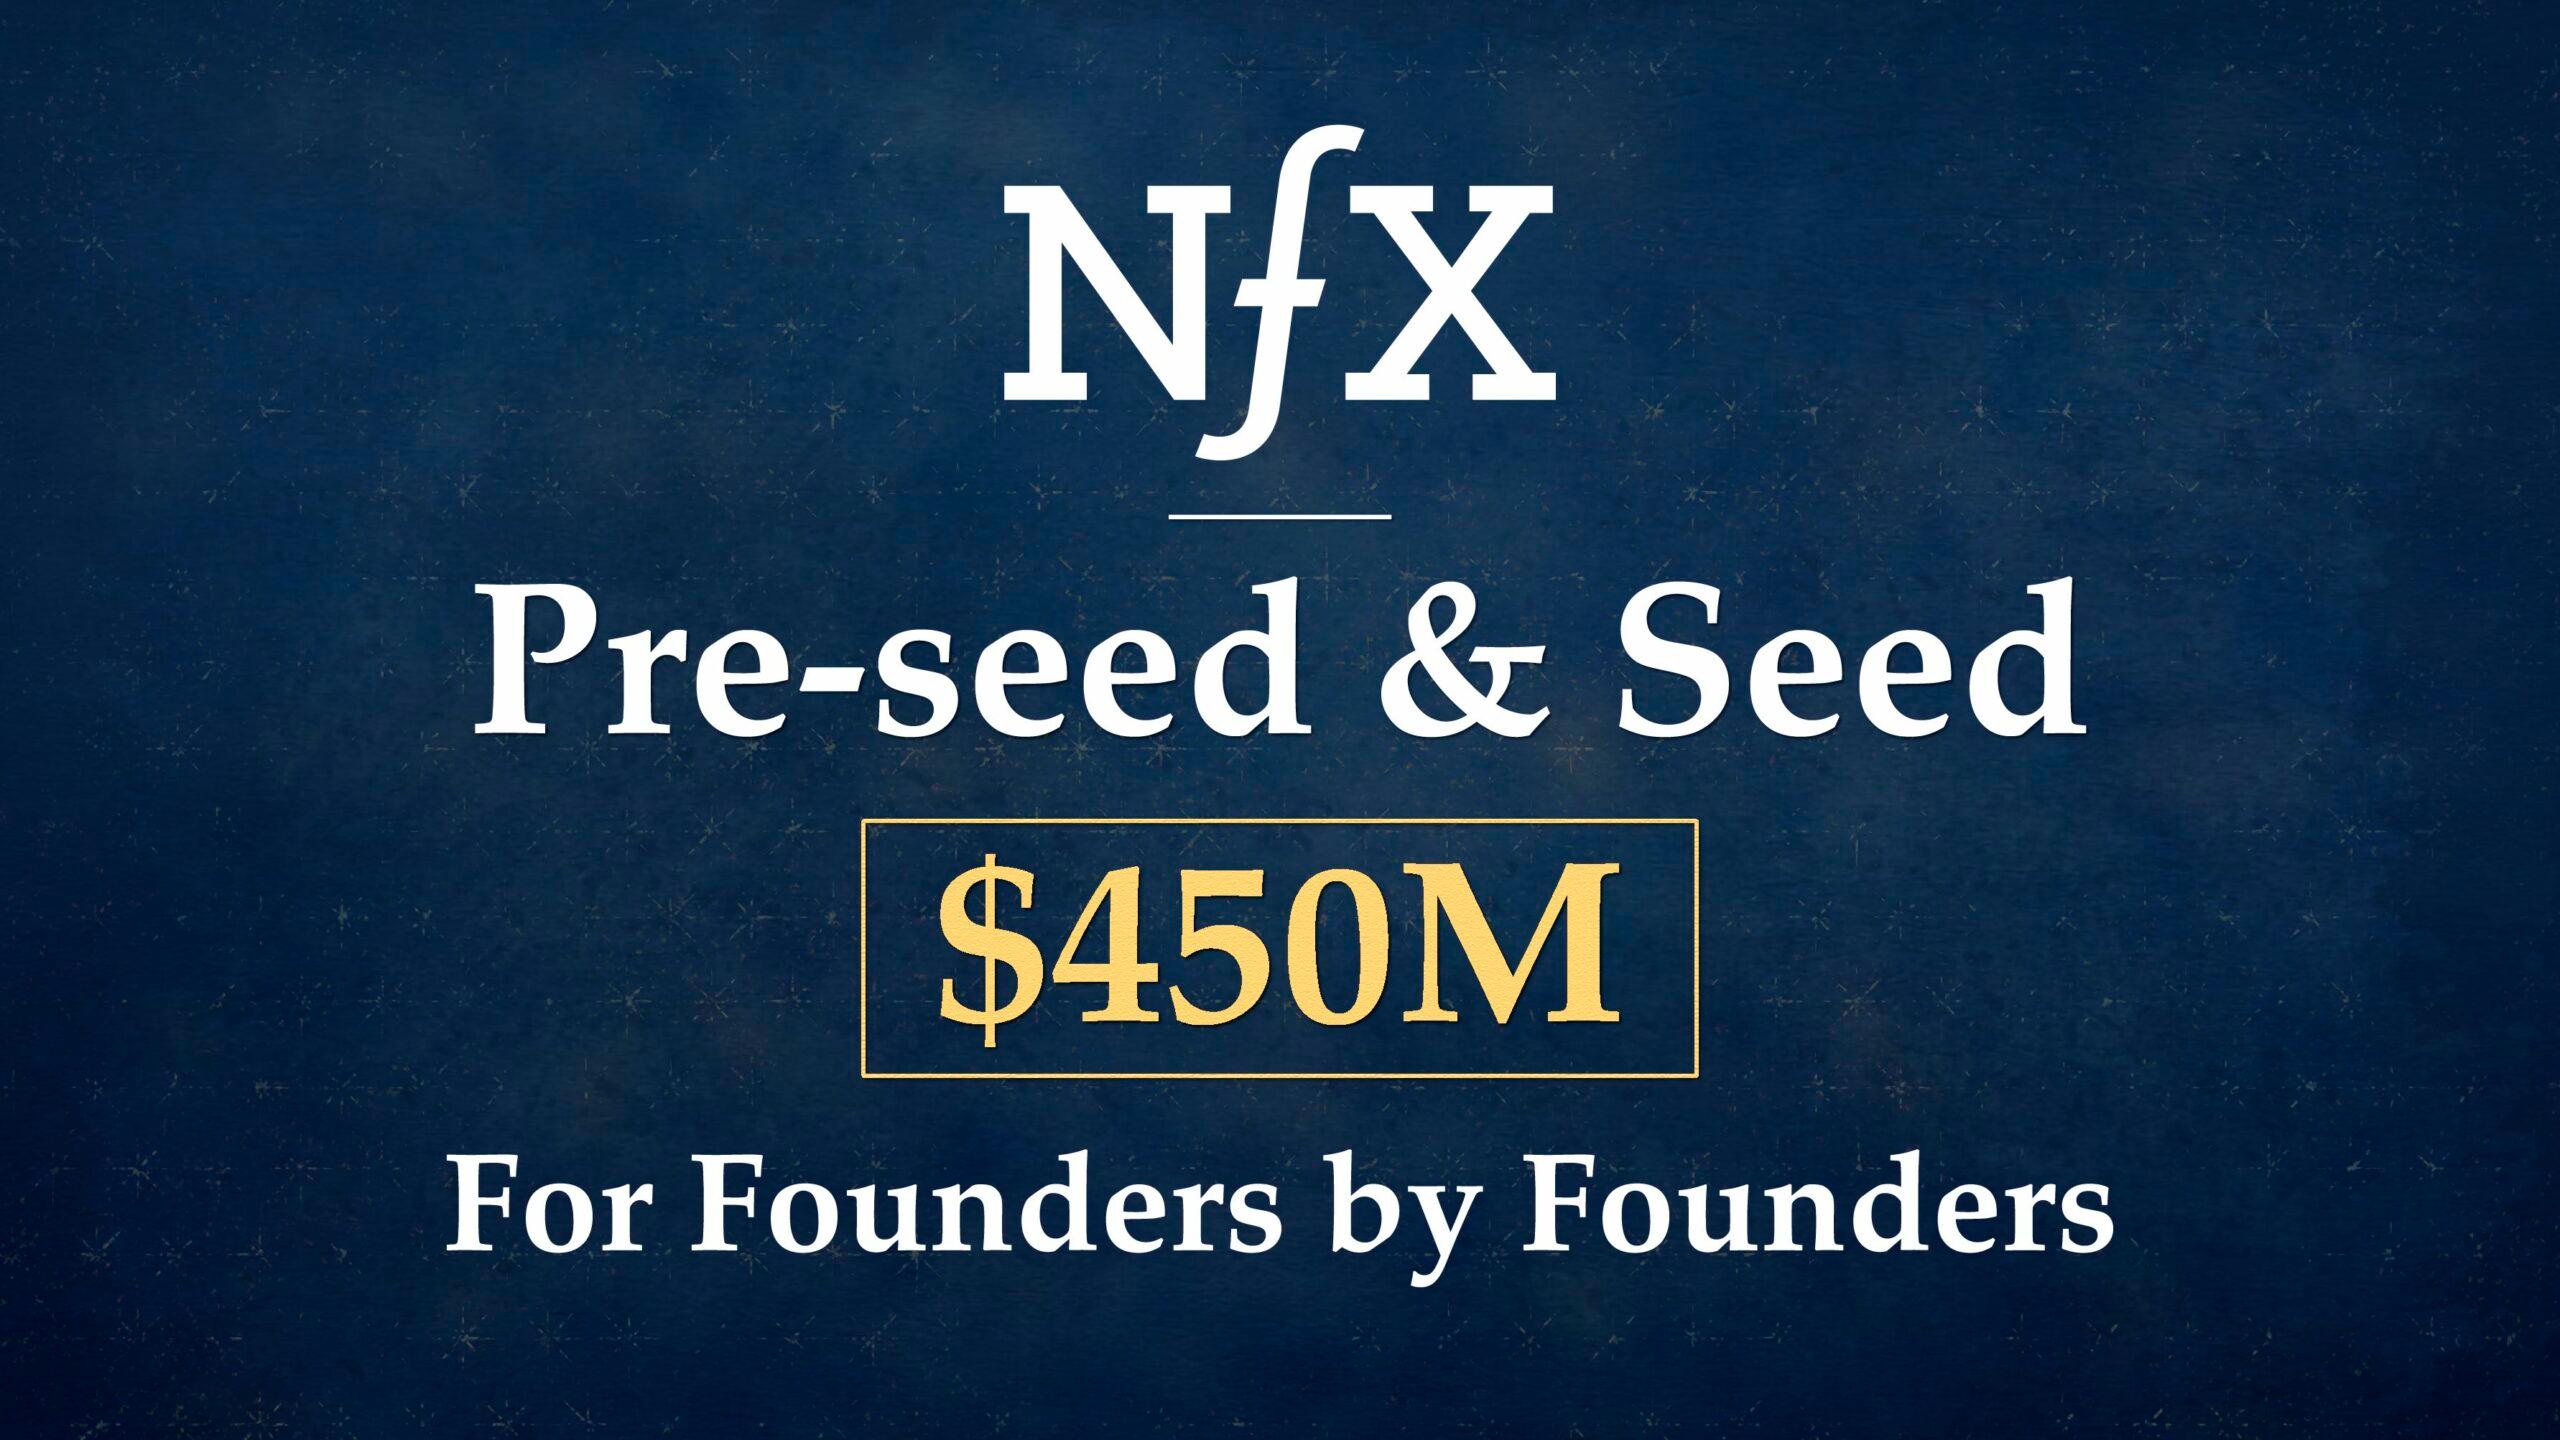 NFX's New $450M Fund For Pre-Seed & Seed